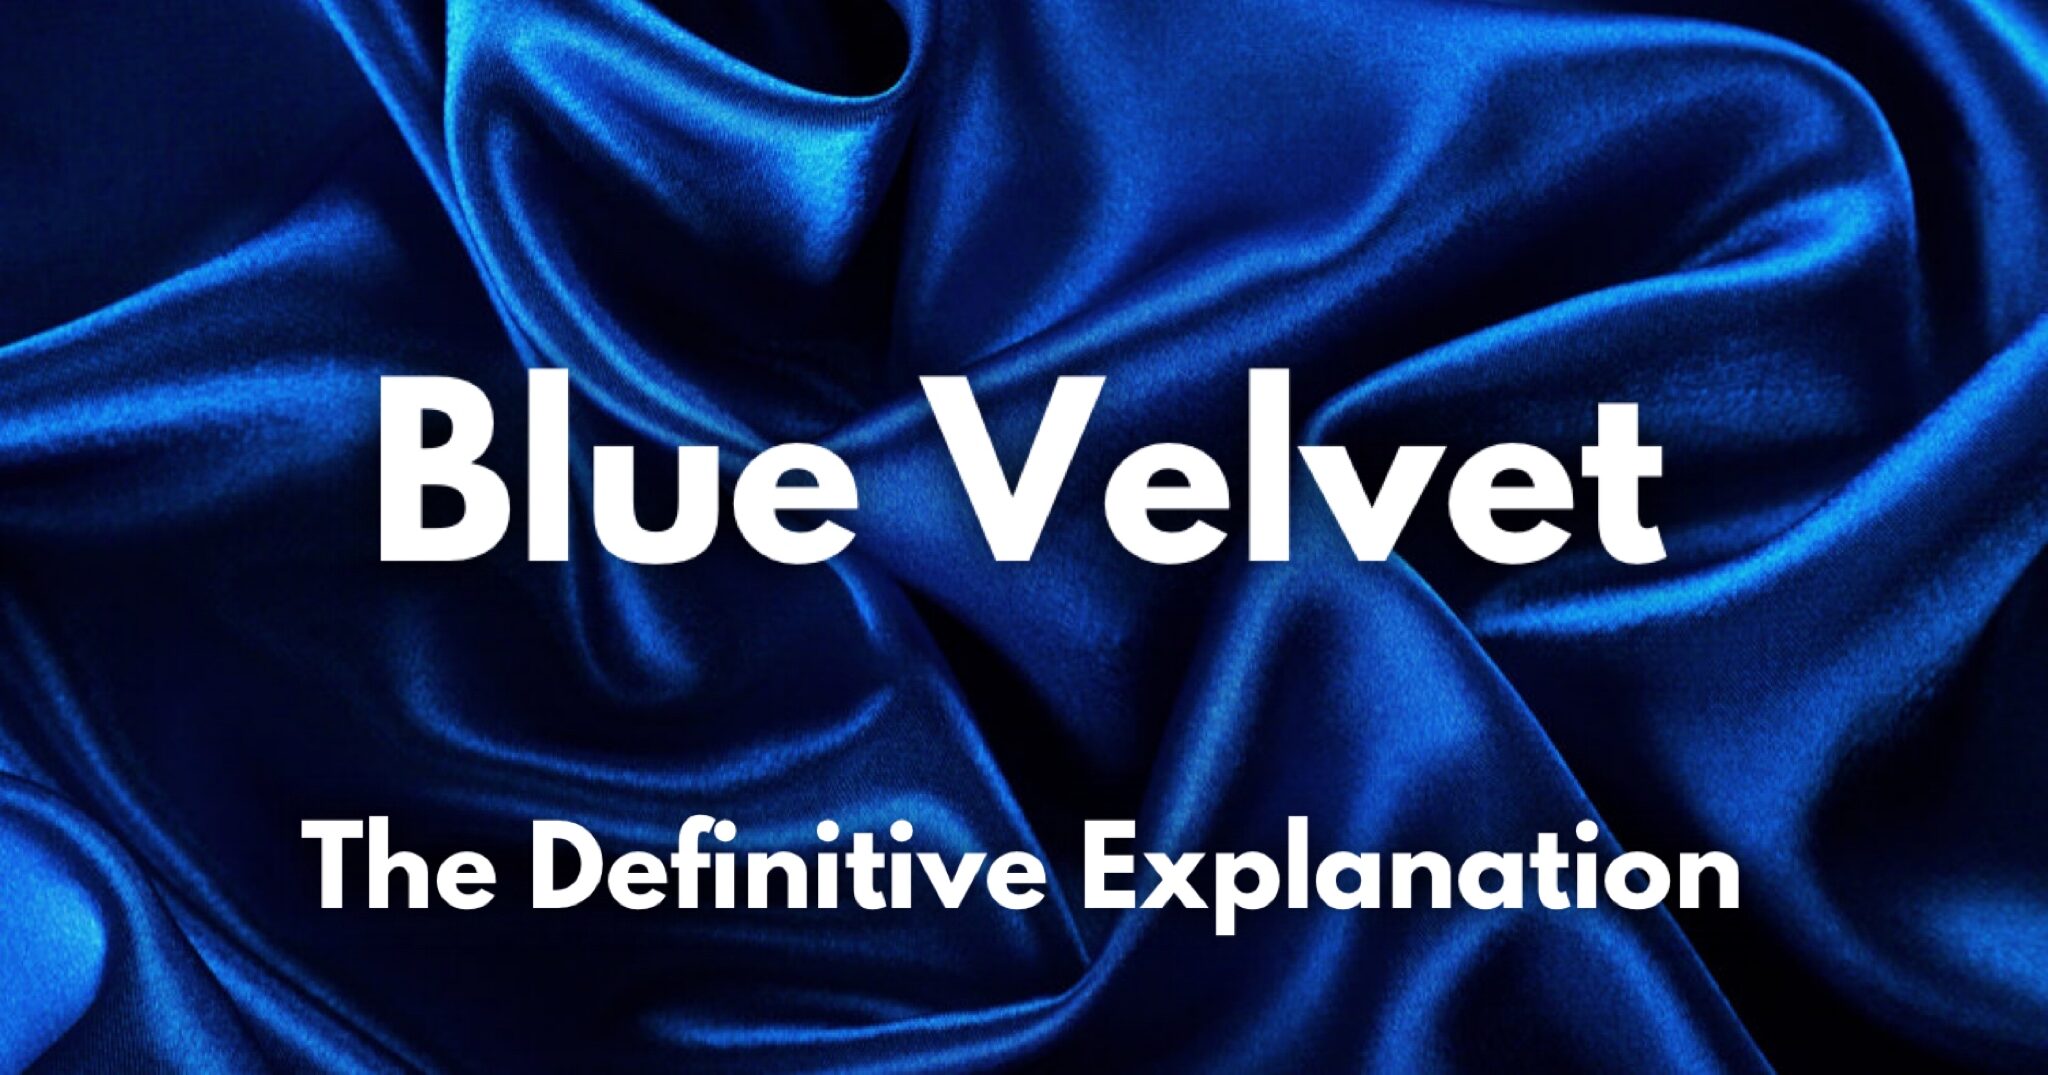 The confusing story of Blue Velvet explained - Colossus